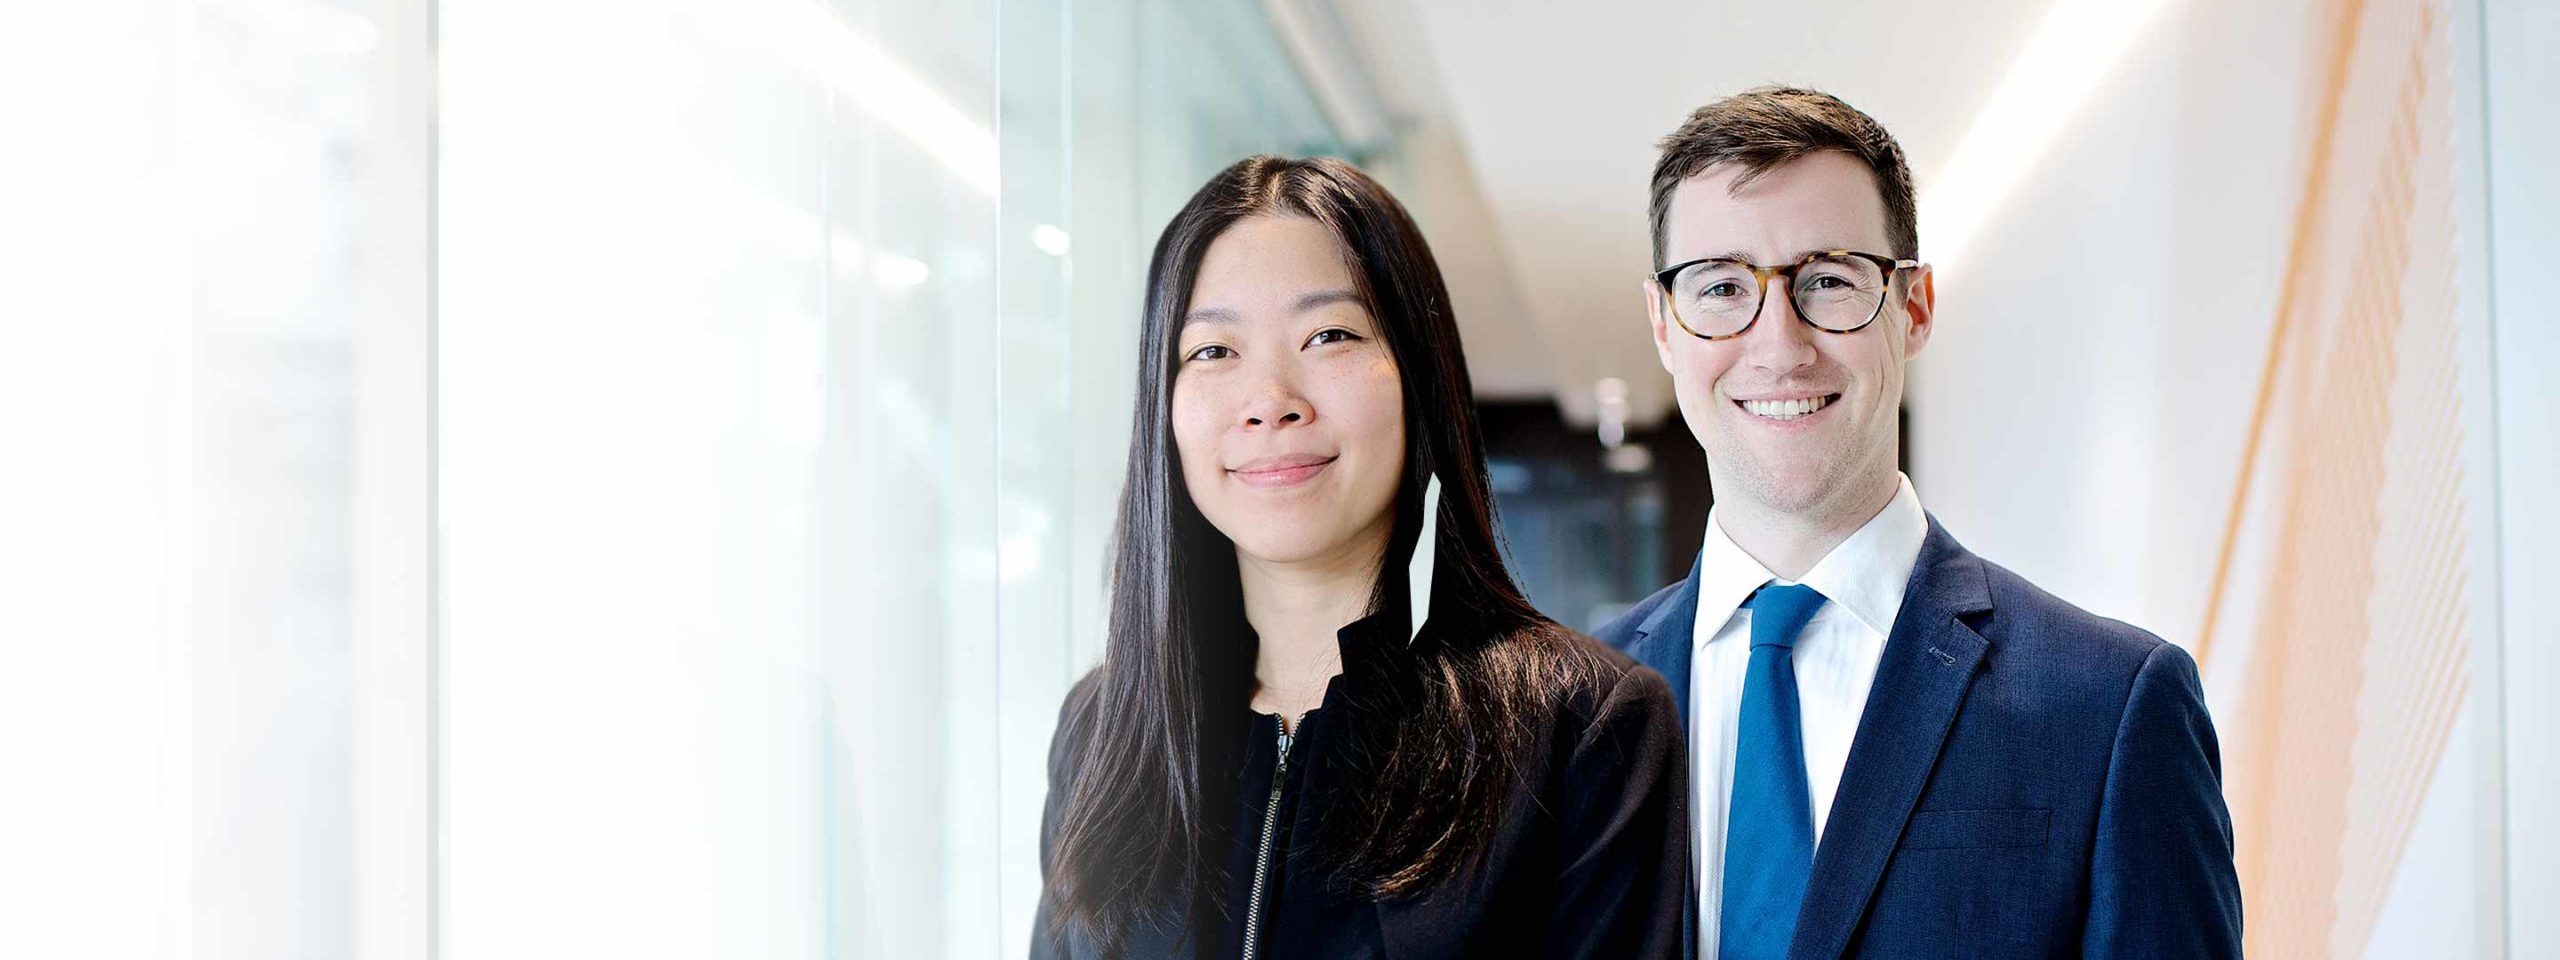 New Practice Partners Dr Wan Yin Lim and Dr Felix Paterson standing inside a clinic